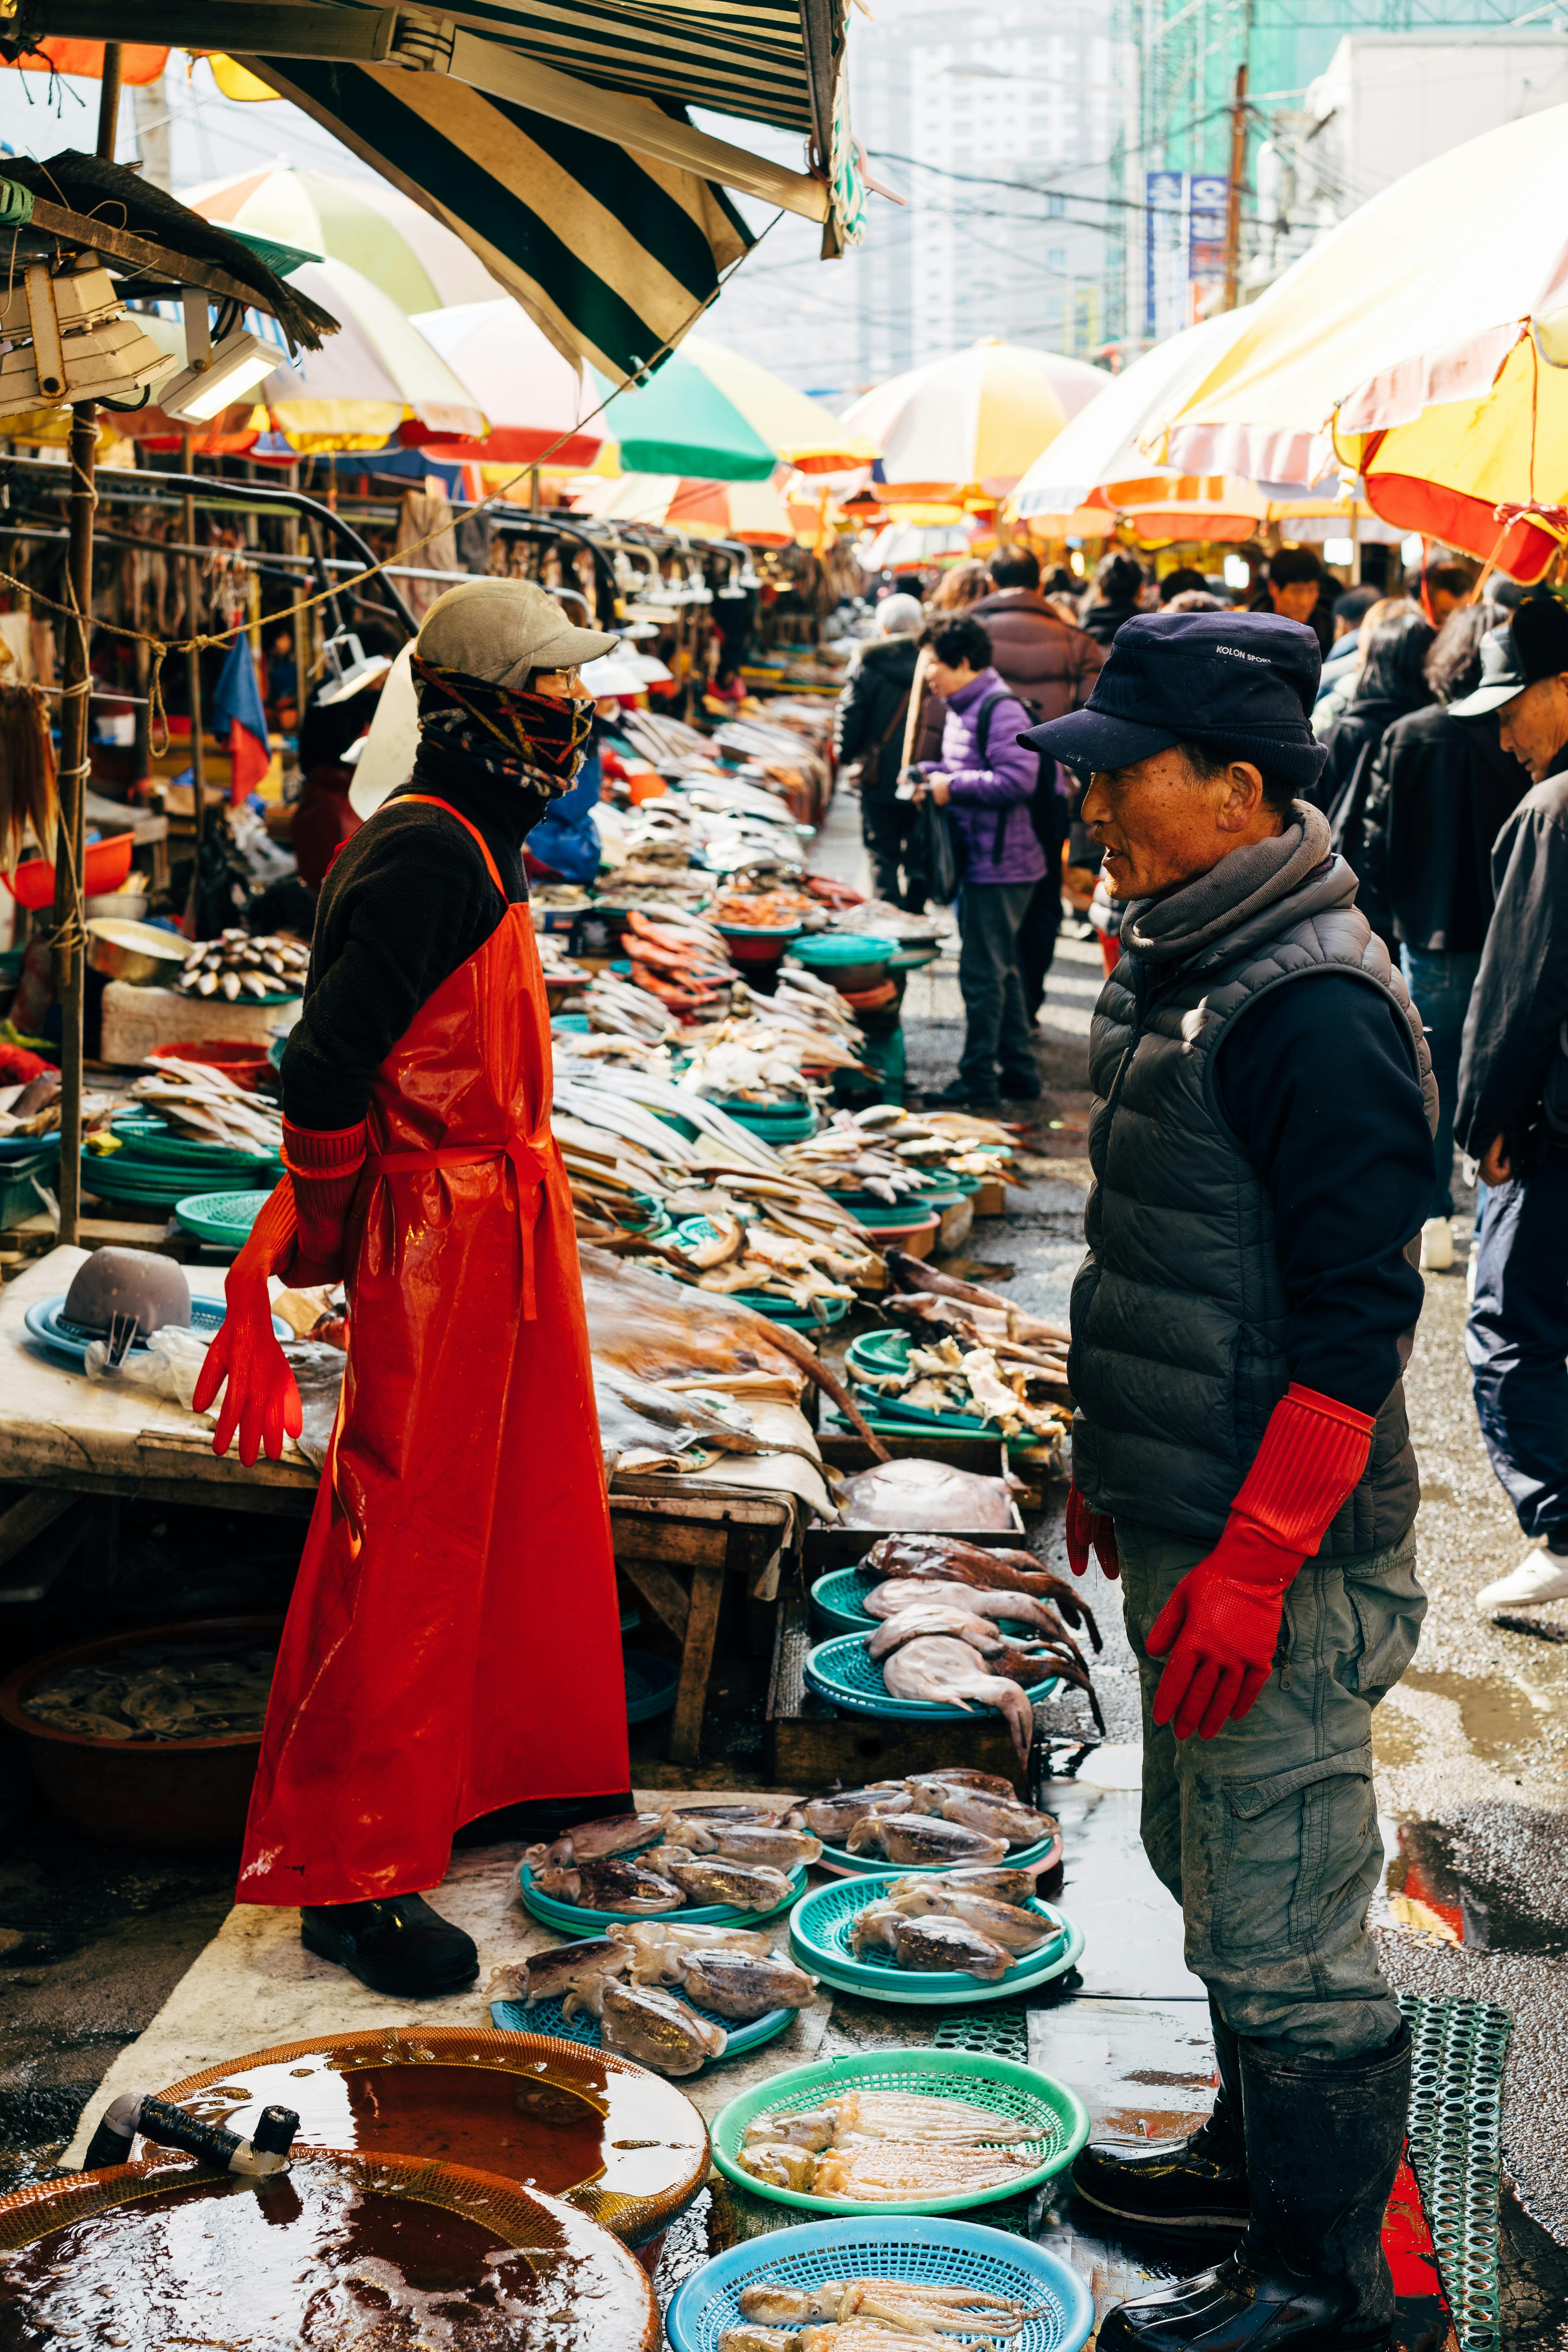 a crowd of people in the fish market lined with colorful umbrellas